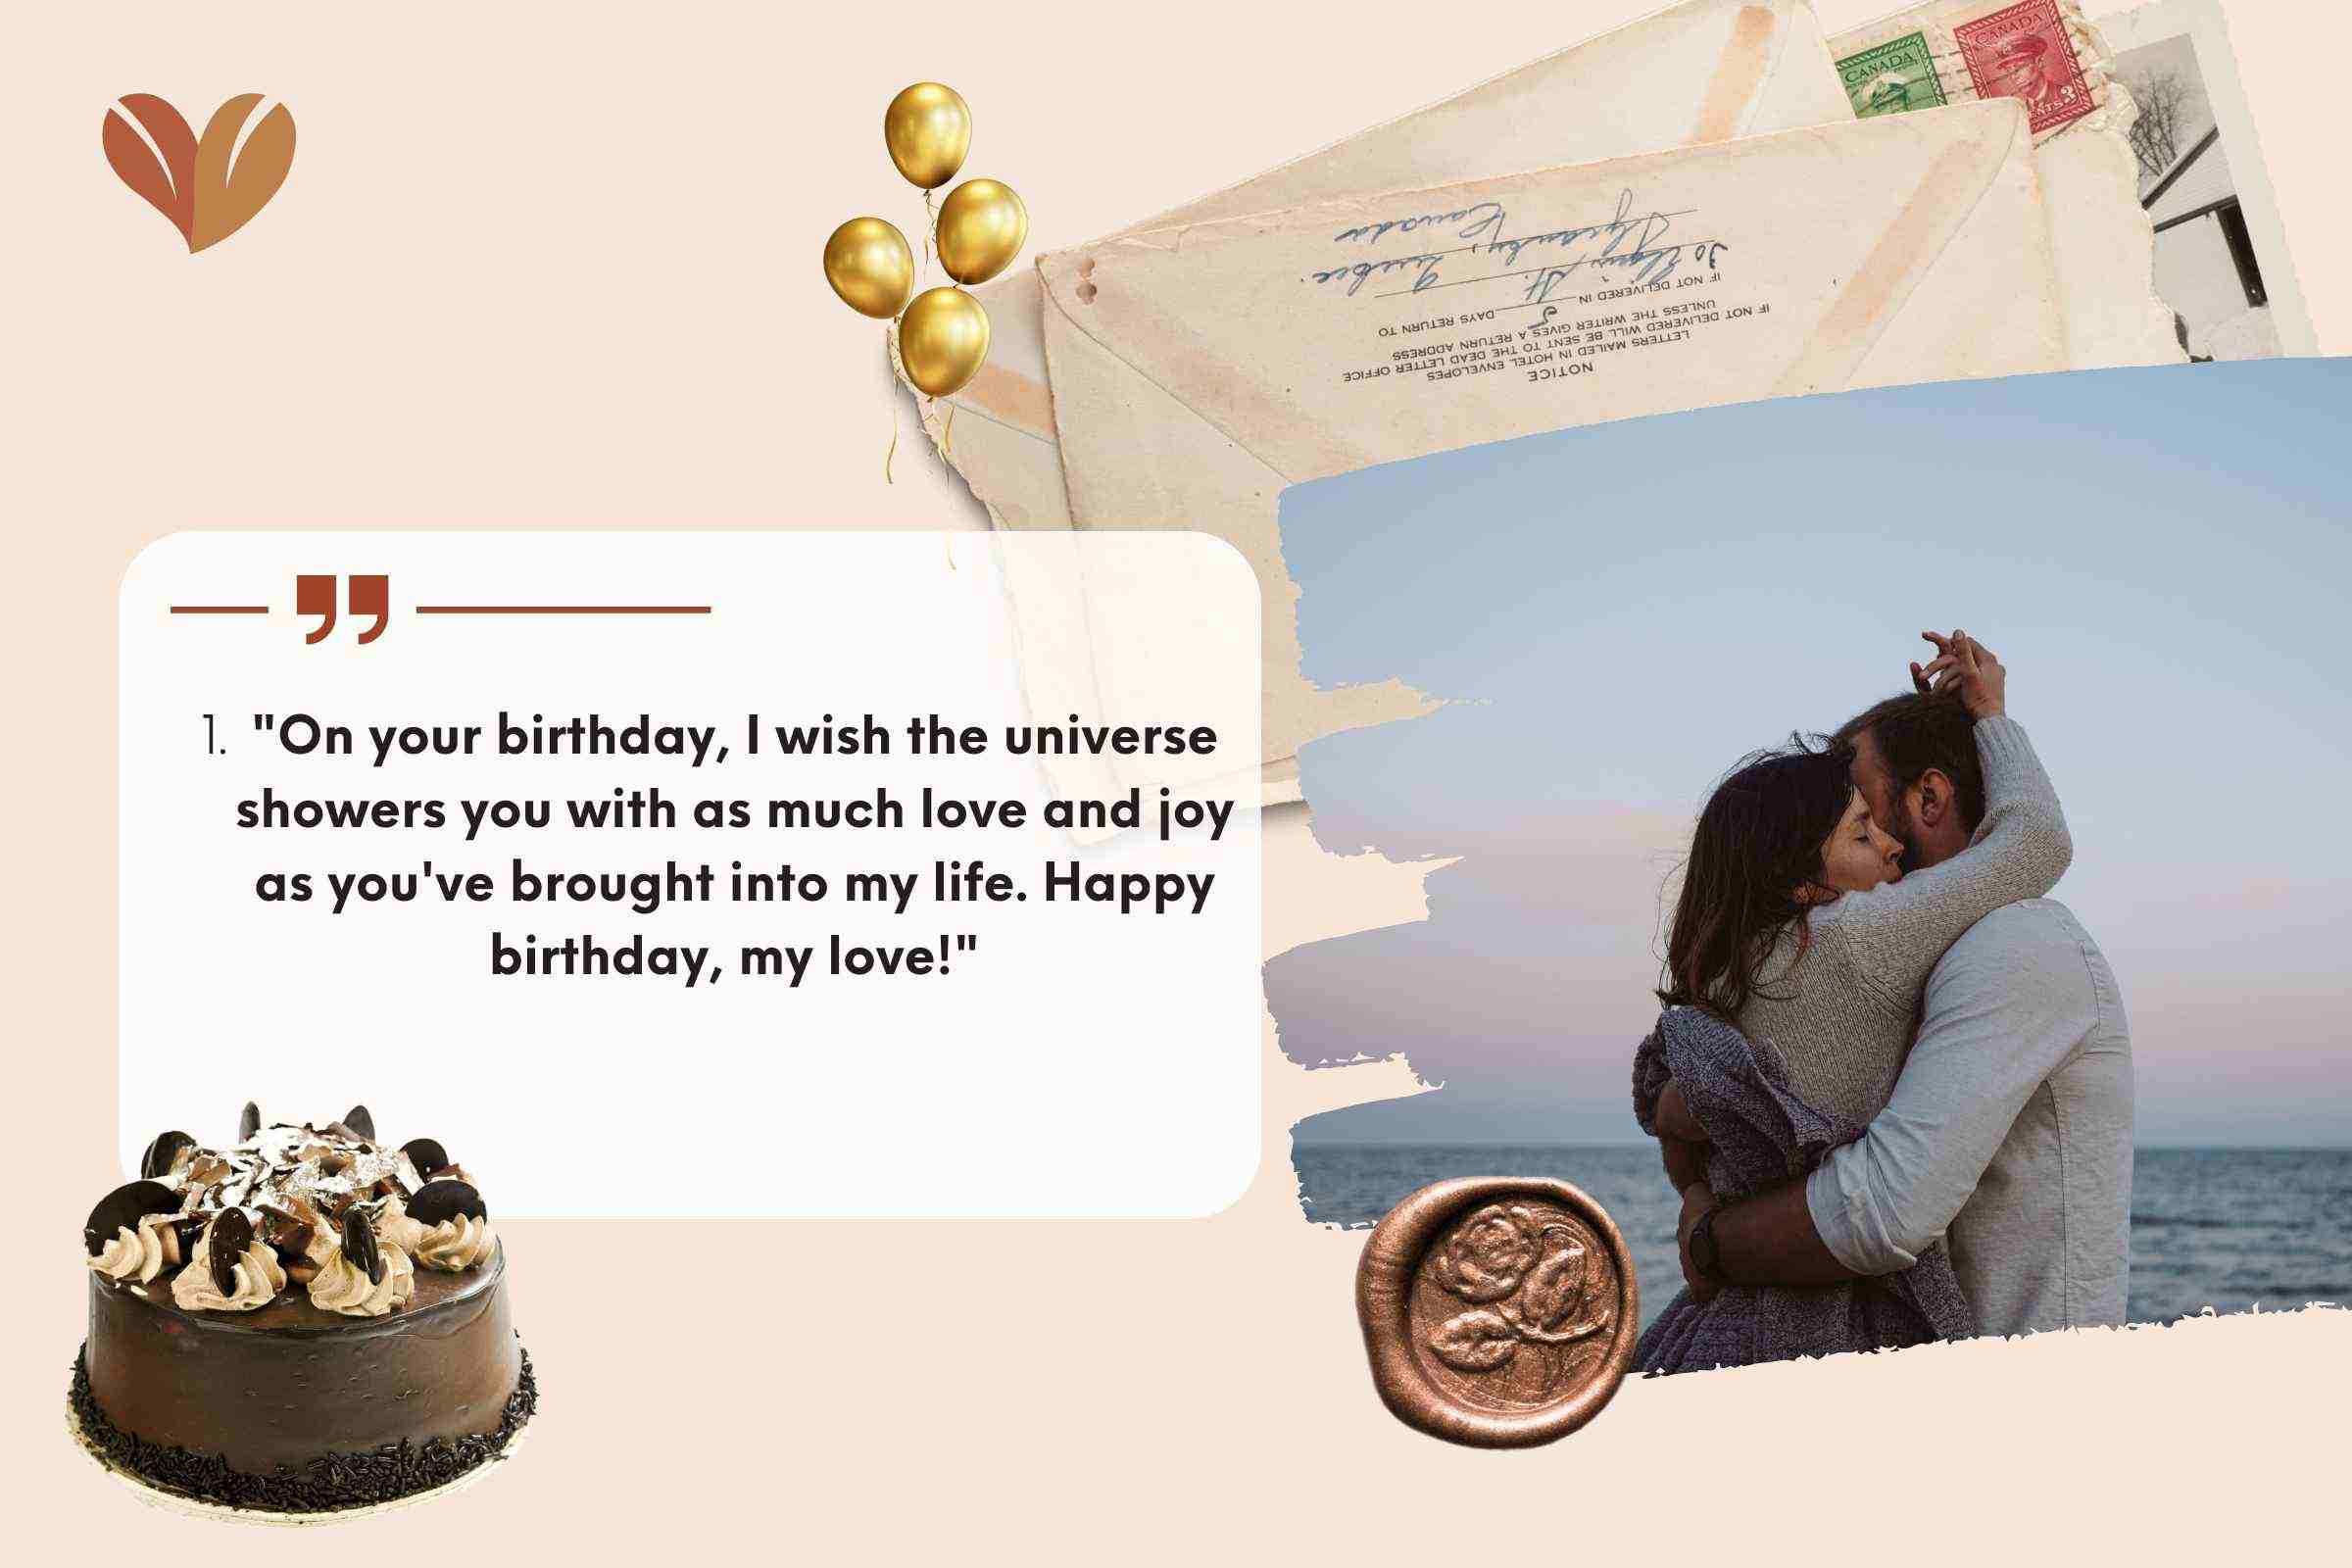 Celebrating the love story with heartfelt quotes on my fiance's birthday.